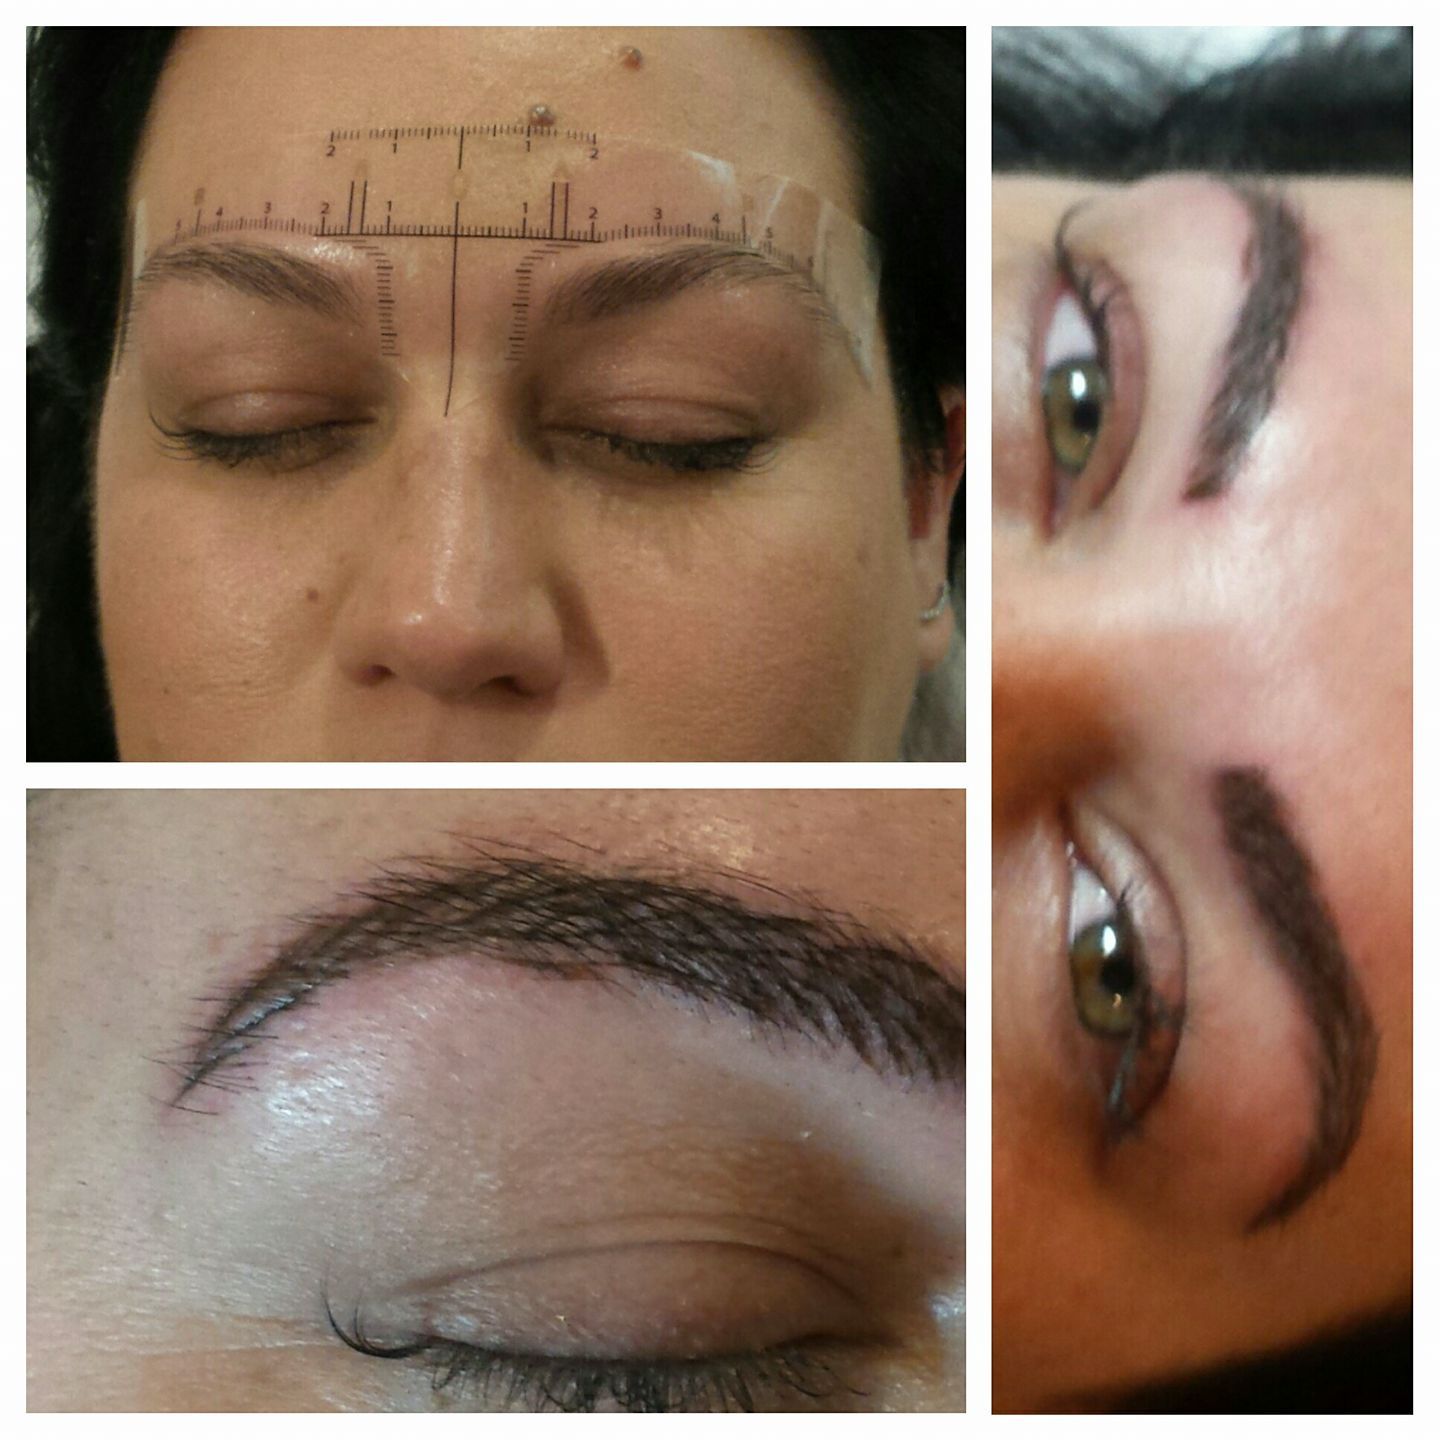 Microblading Is The Latest Semi-permanent Make-up